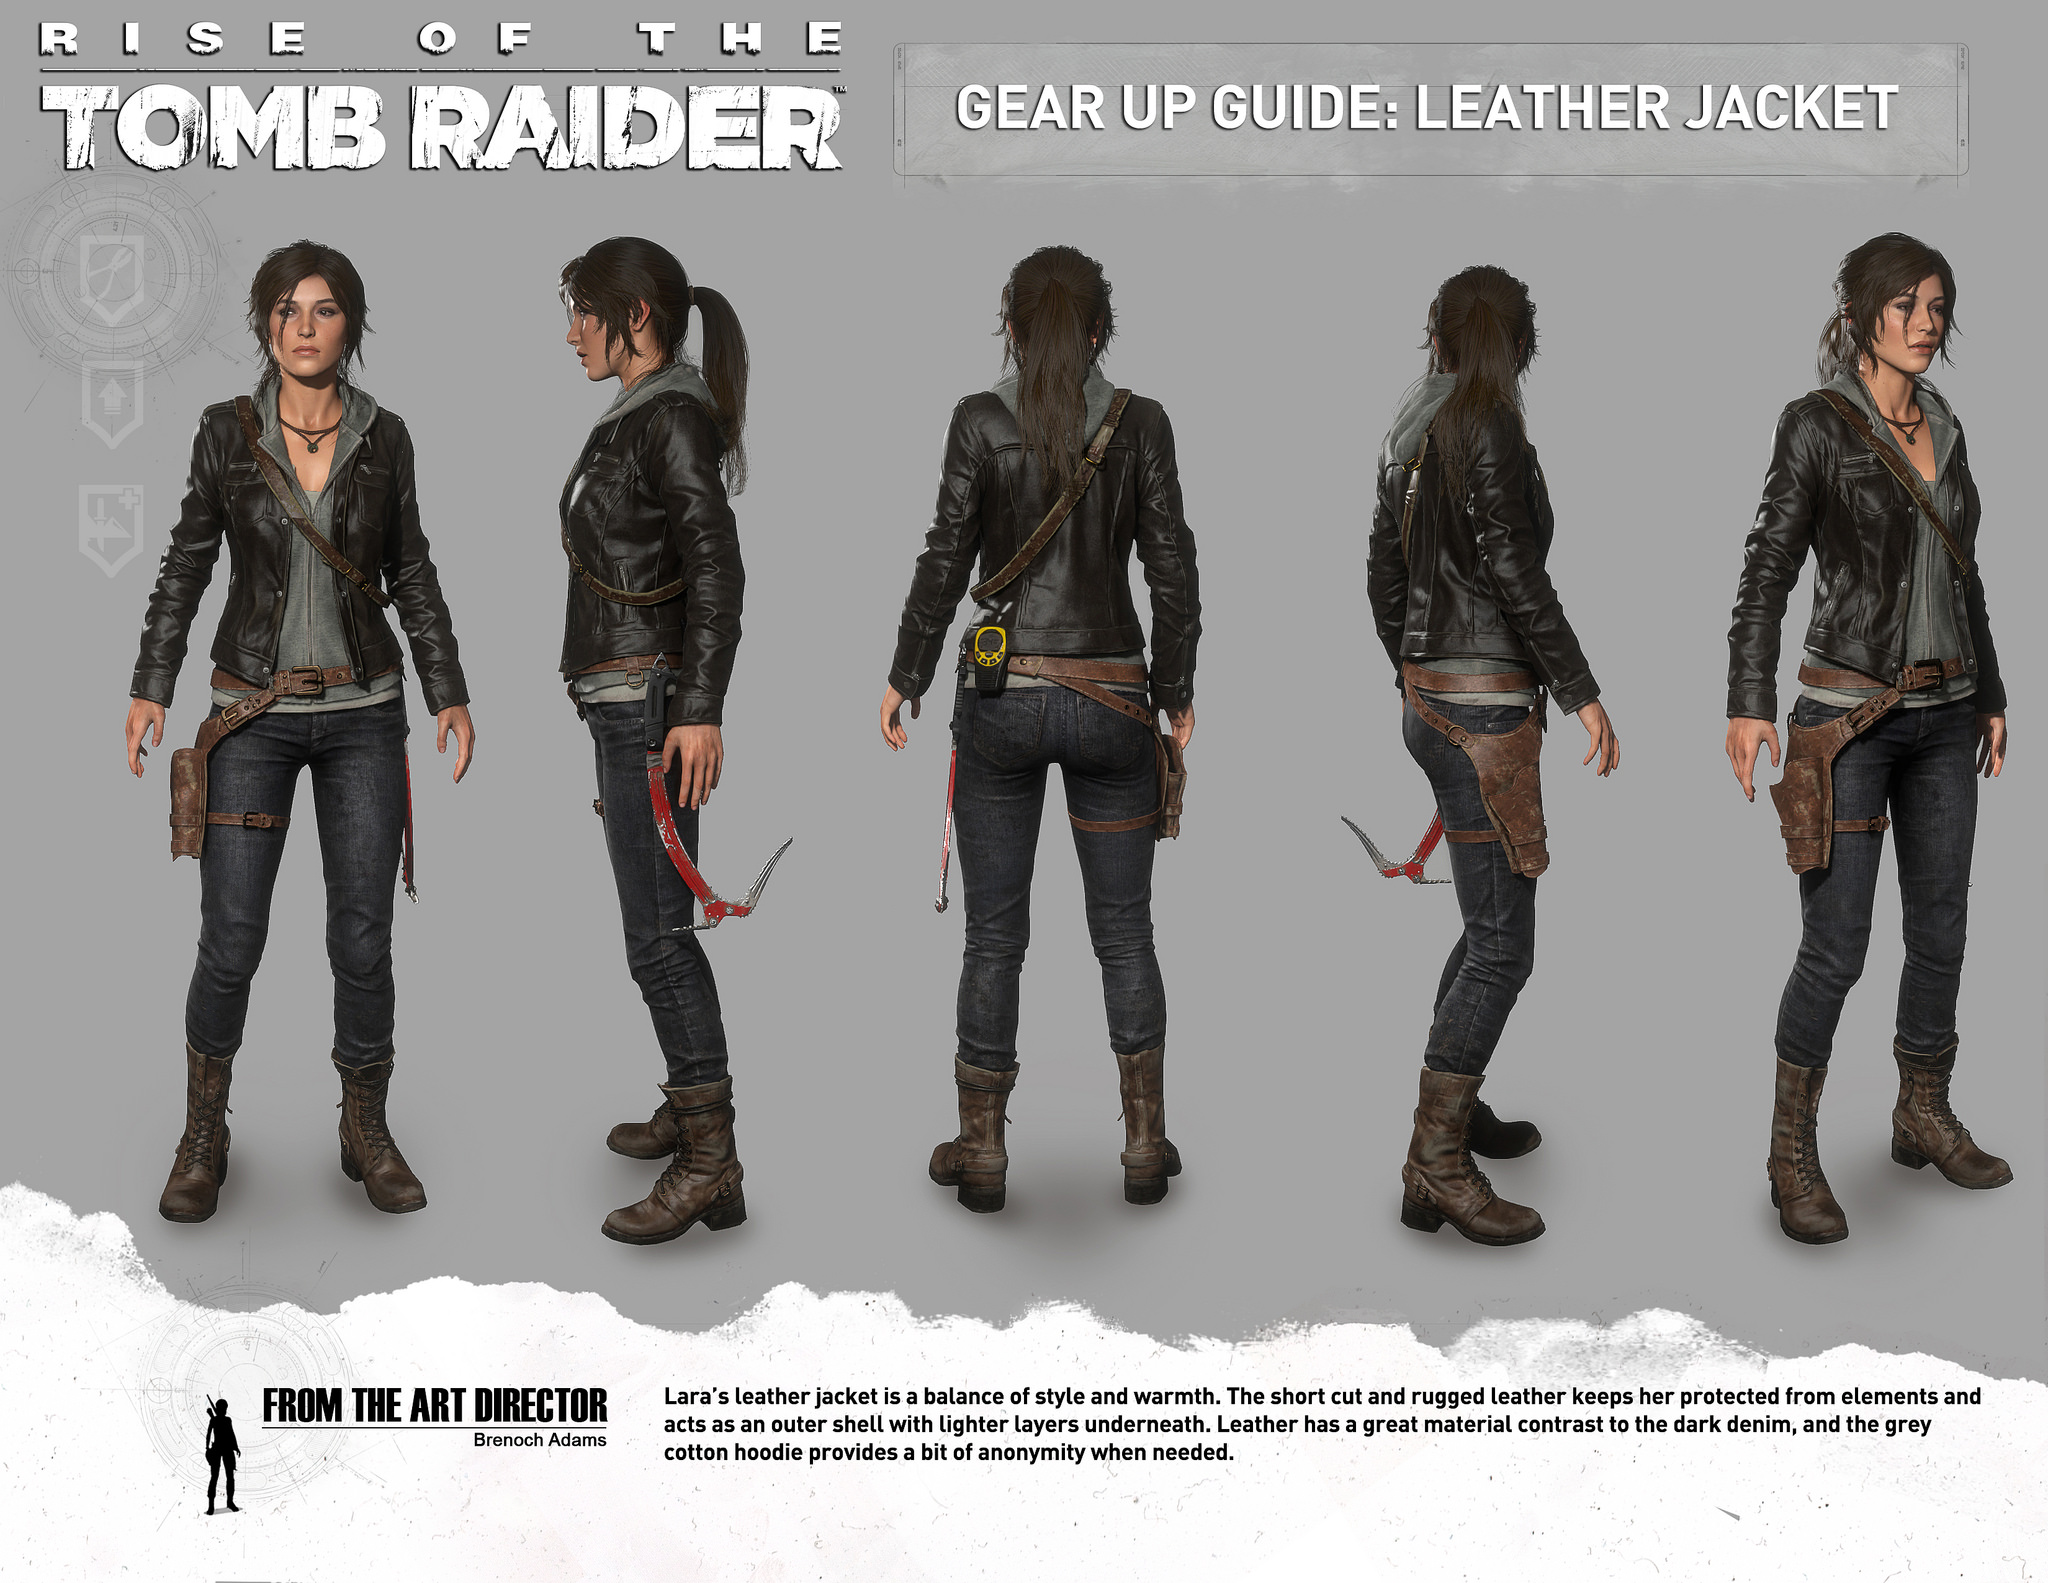 zweer vaak Bedienen Gear Up Guide 3: Leather Jacket Outfit | News | Aspidetr.com